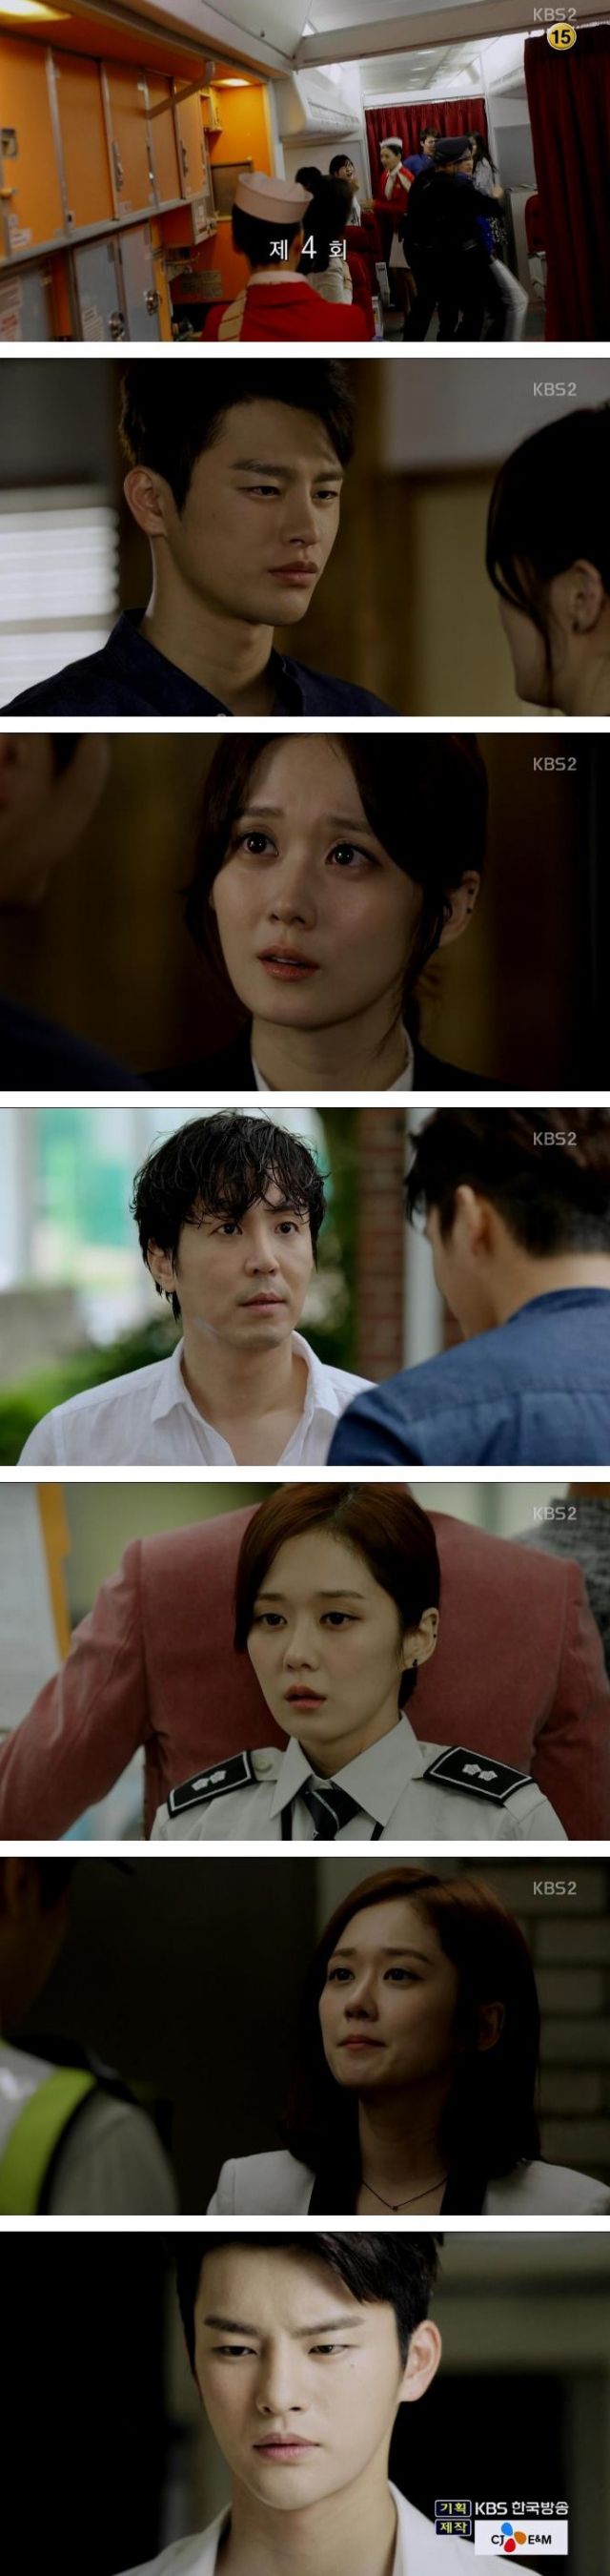 episode 4 captures for the Korean drama 'Remember You'